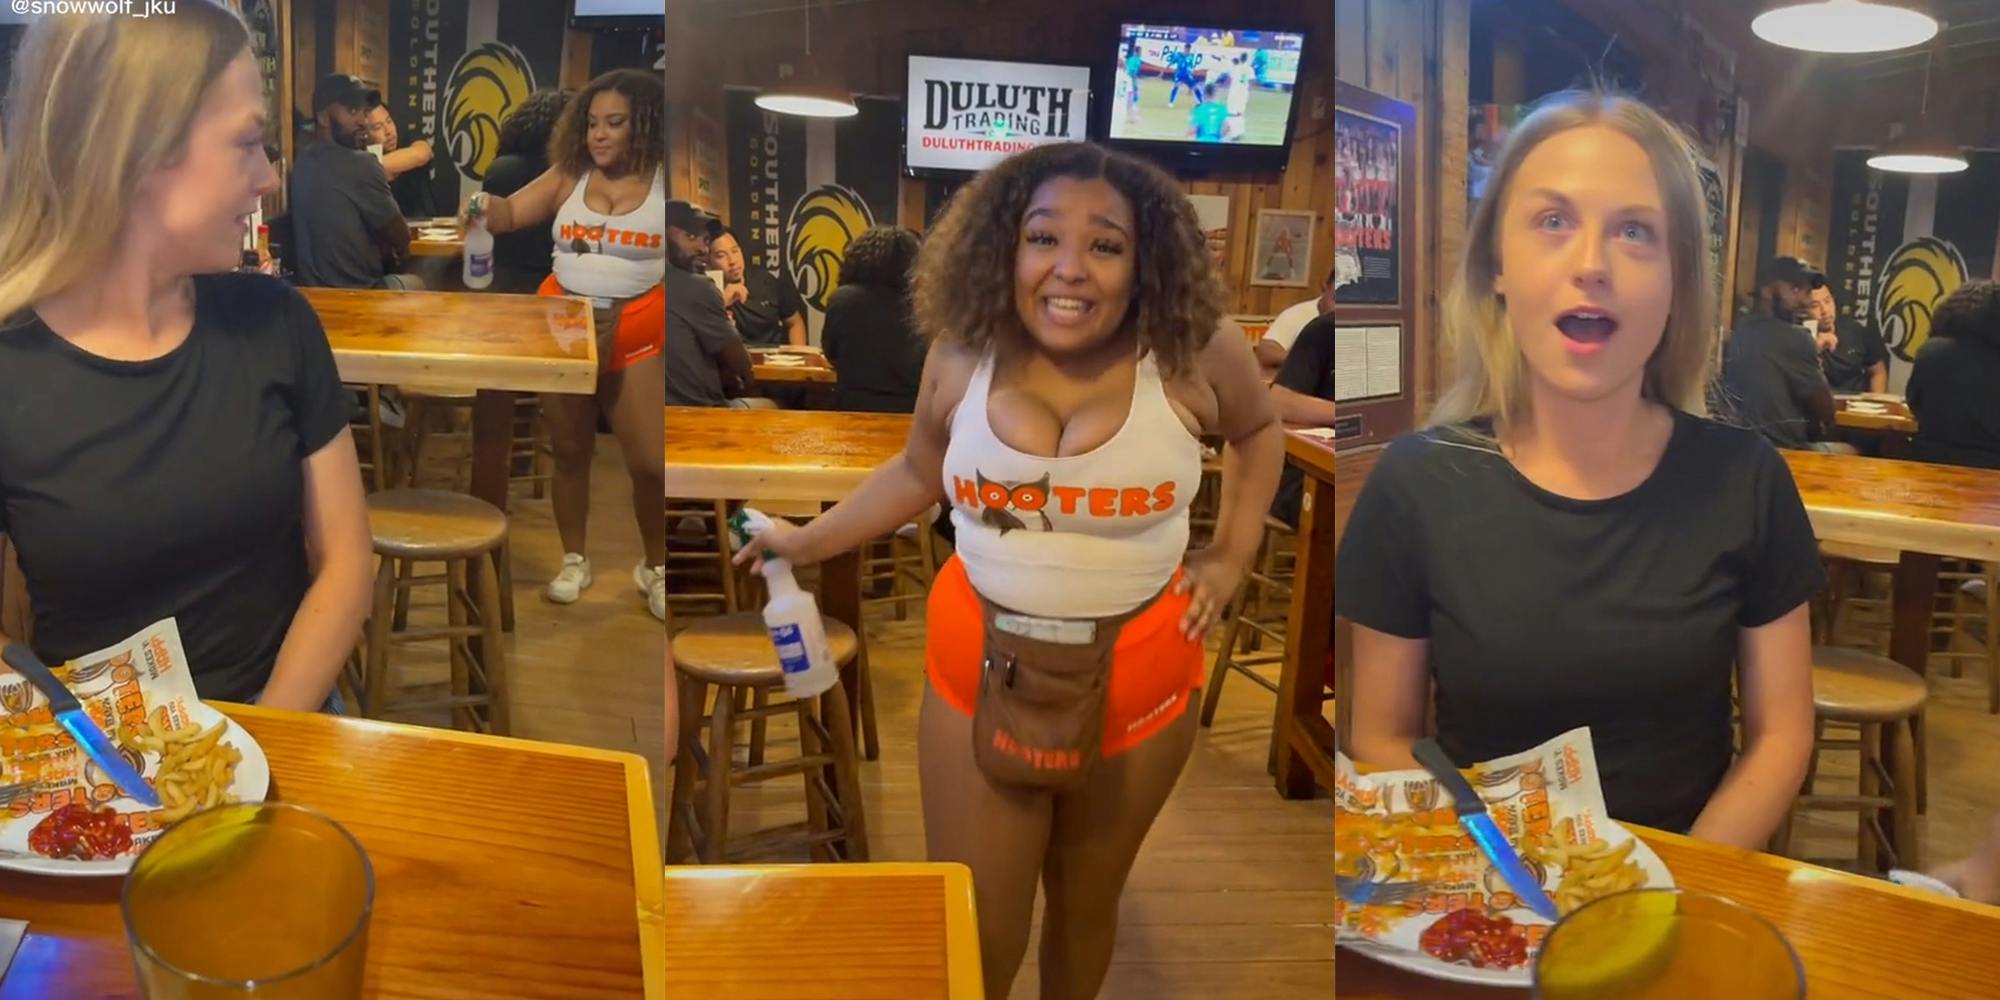 ‘Can you please stop that? You’re getting my girlfriend wet’: Hooters waitress cleaning table claps back at man filming—it’s probably fake